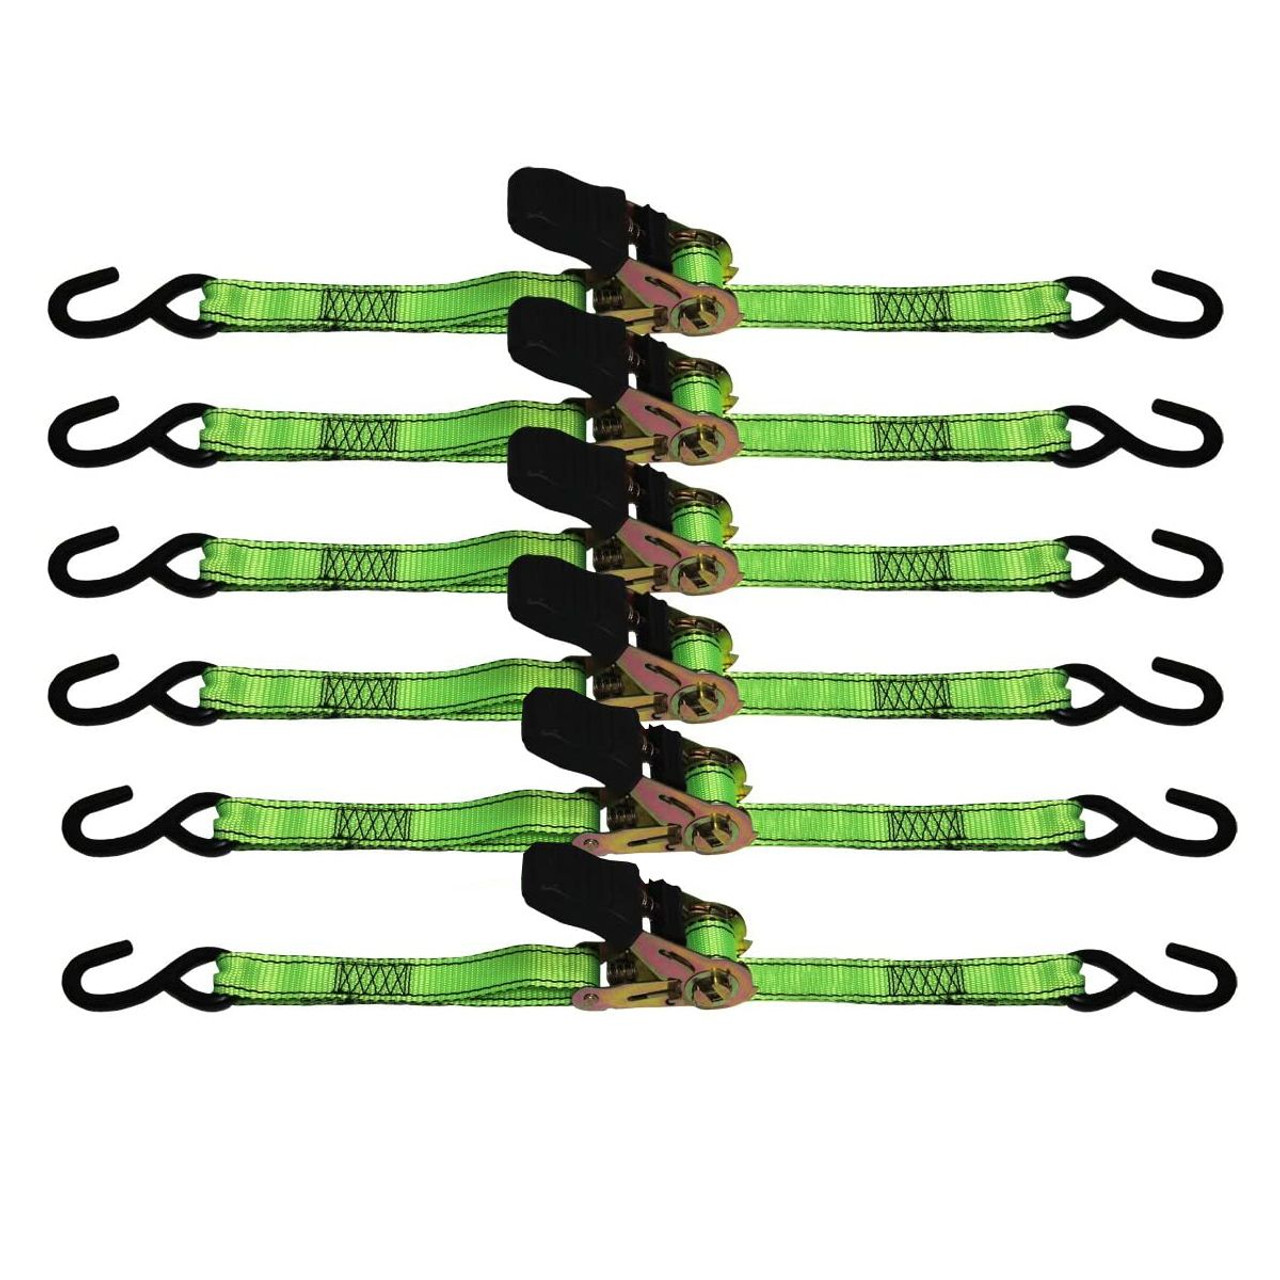 GRIP On Tools 1"x12' 6pk Ratchet Tie Down |By the Case|